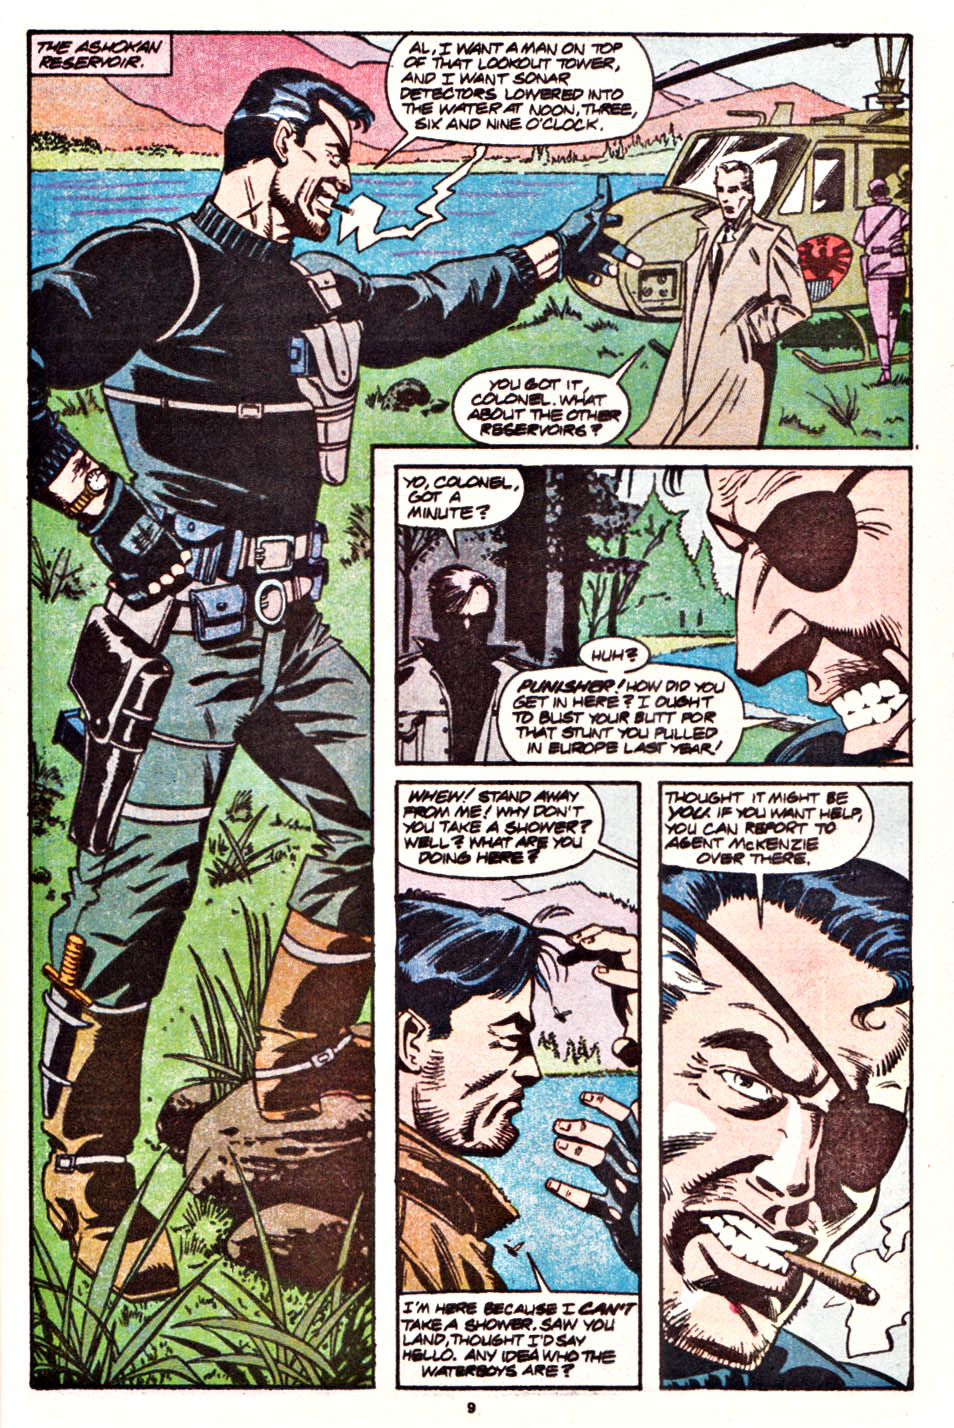 Read online The Punisher (1987) comic -  Issue #41 - Should a Gentleman offer a Tiparillo to a Lady - 8